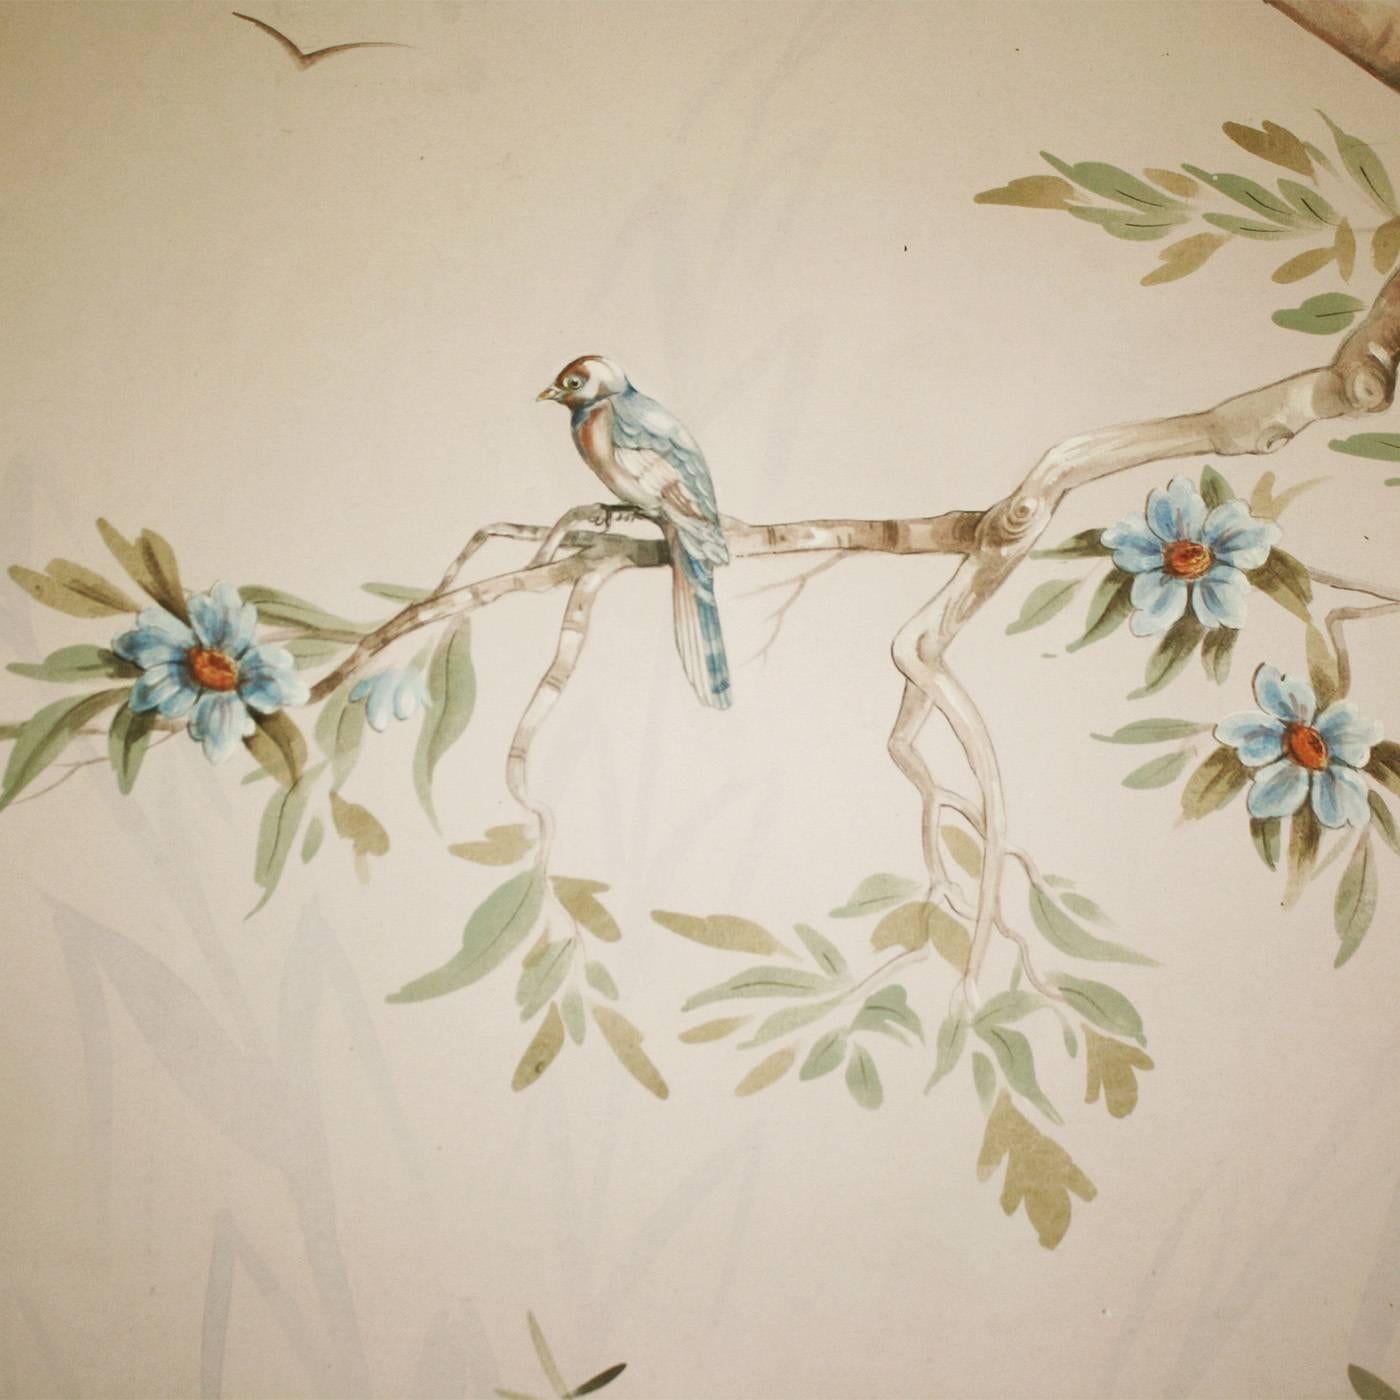 This superb wallpaper was painted by hand on natural cotton canvas and is a one-of-a-kind. The leaves are painted freehand, while the rest of the painting, with its delicate and slender branches and its soft soil accented with stones, is executed